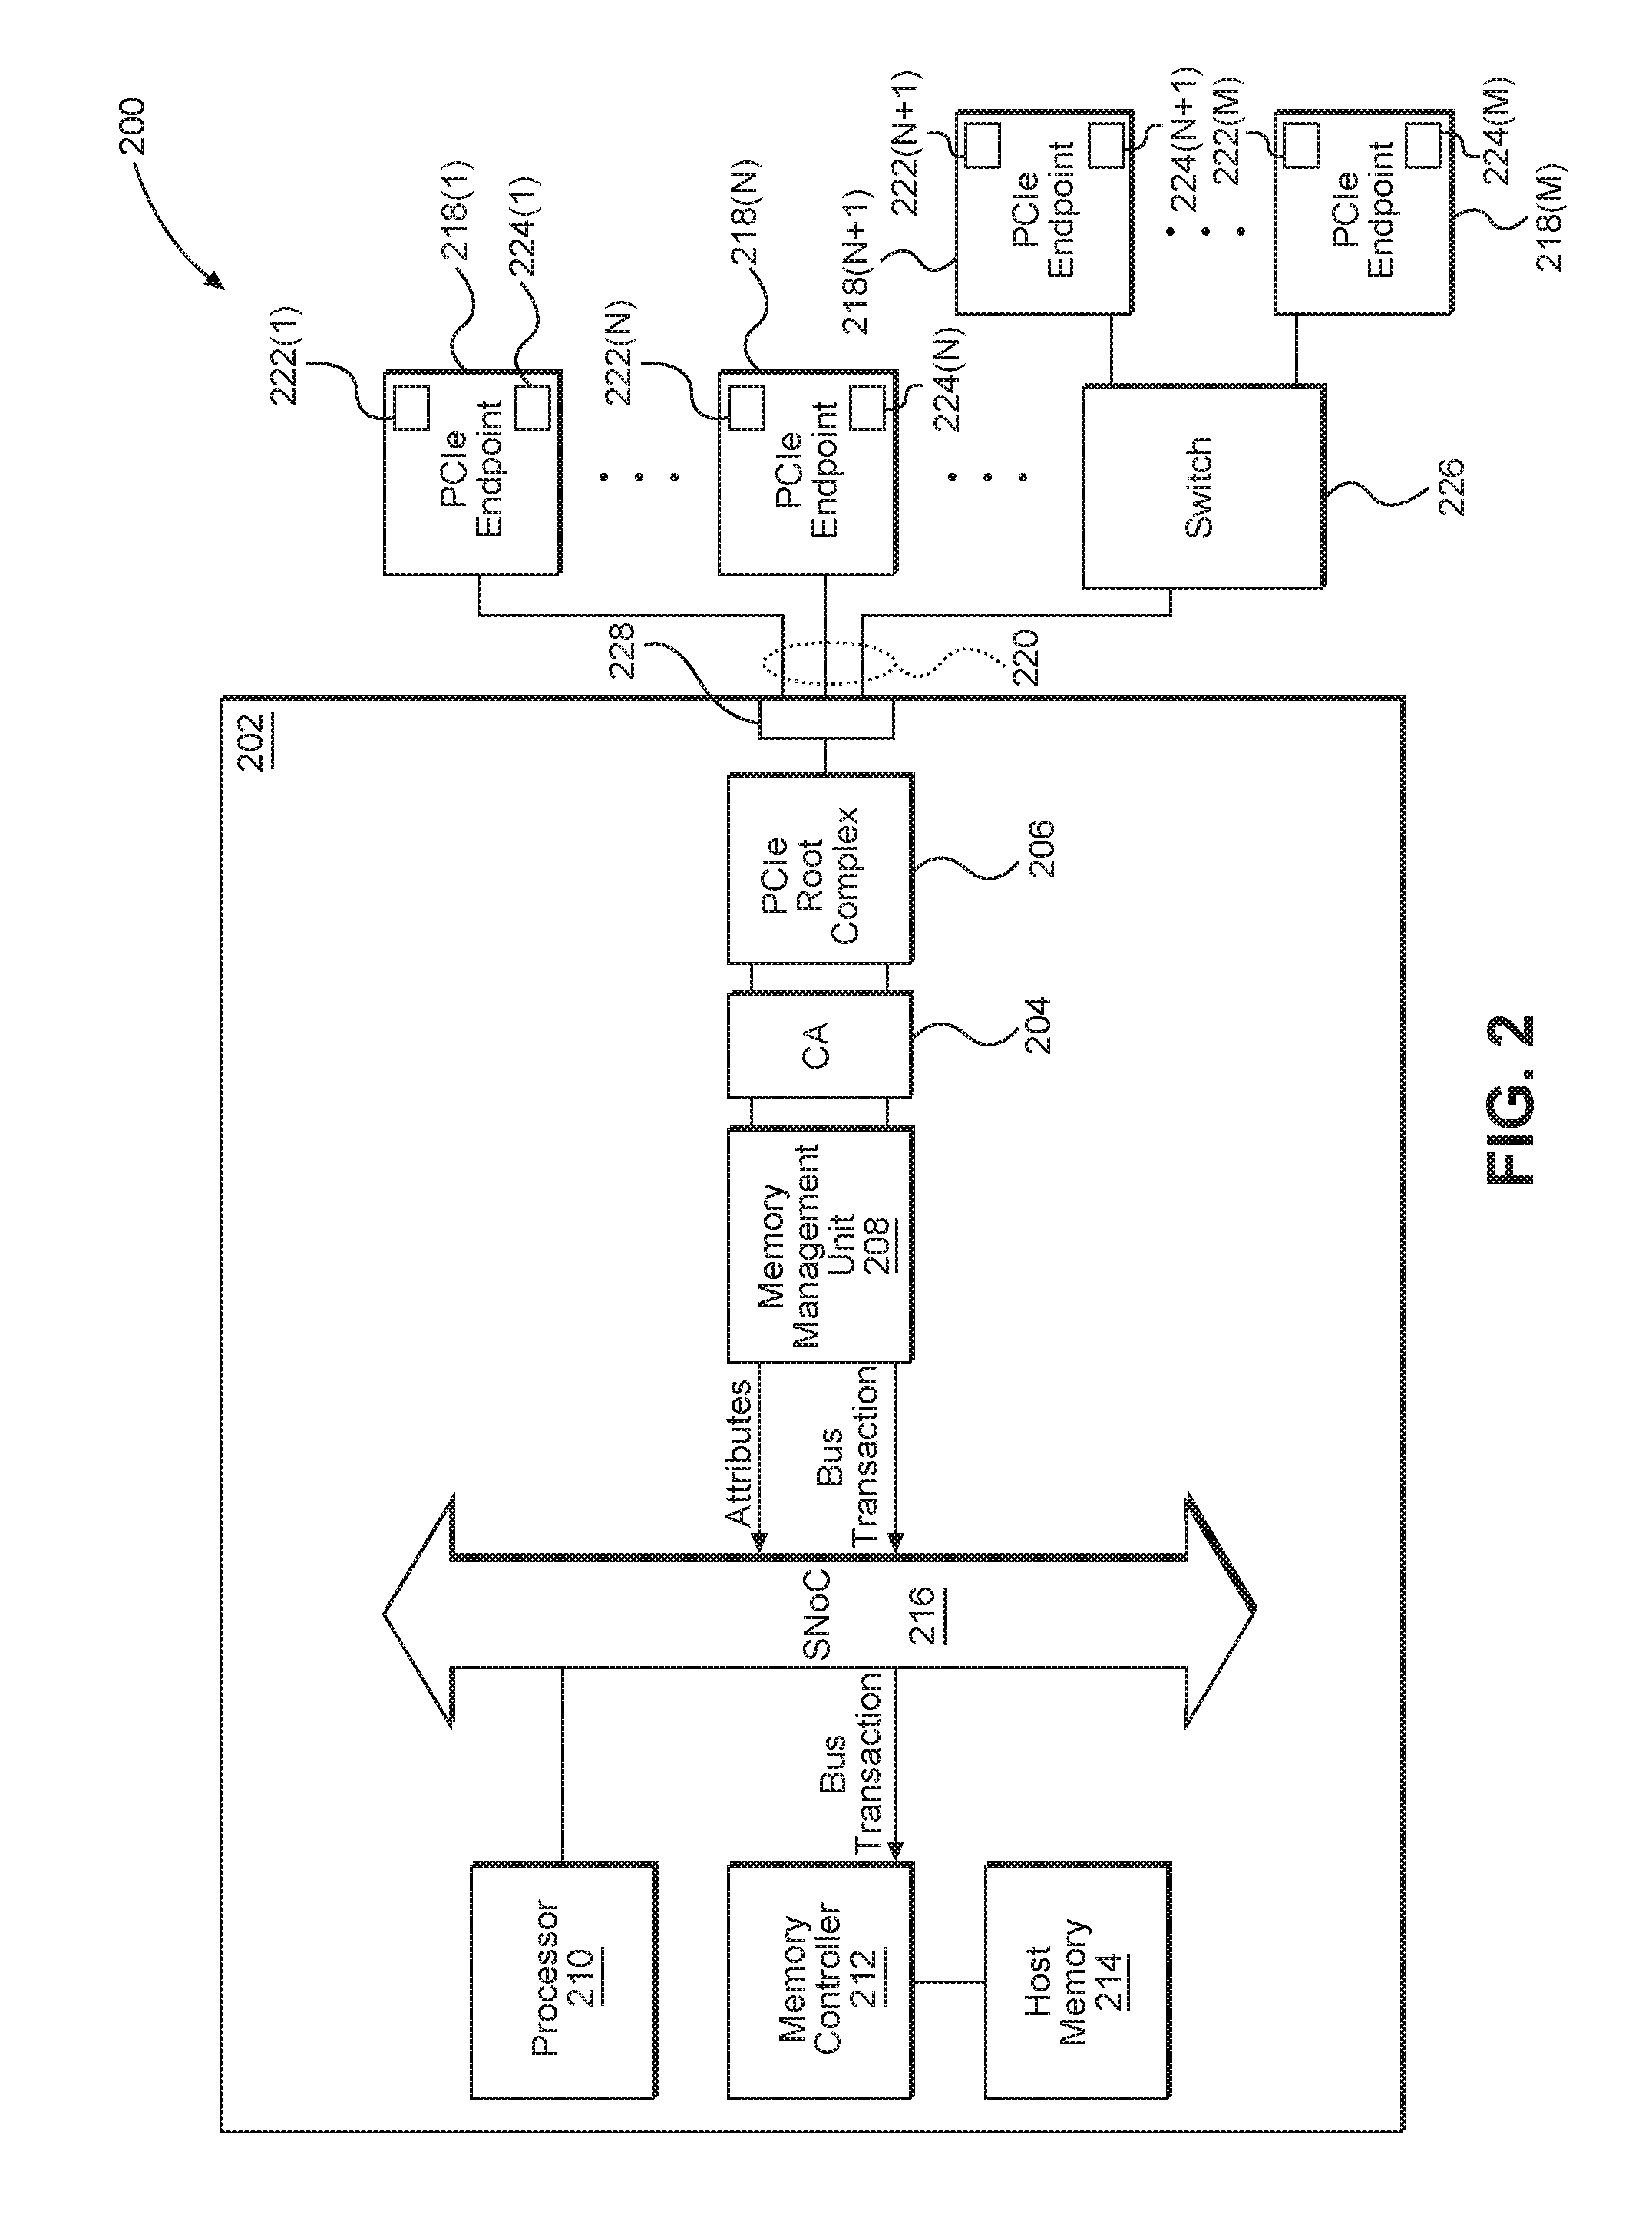 COHERENCY DRIVEN ENHANCEMENTS TO A PERIPHERAL COMPONENT INTERCONNECT (PCI) EXPRESS (PCIe) TRANSACTION LAYER